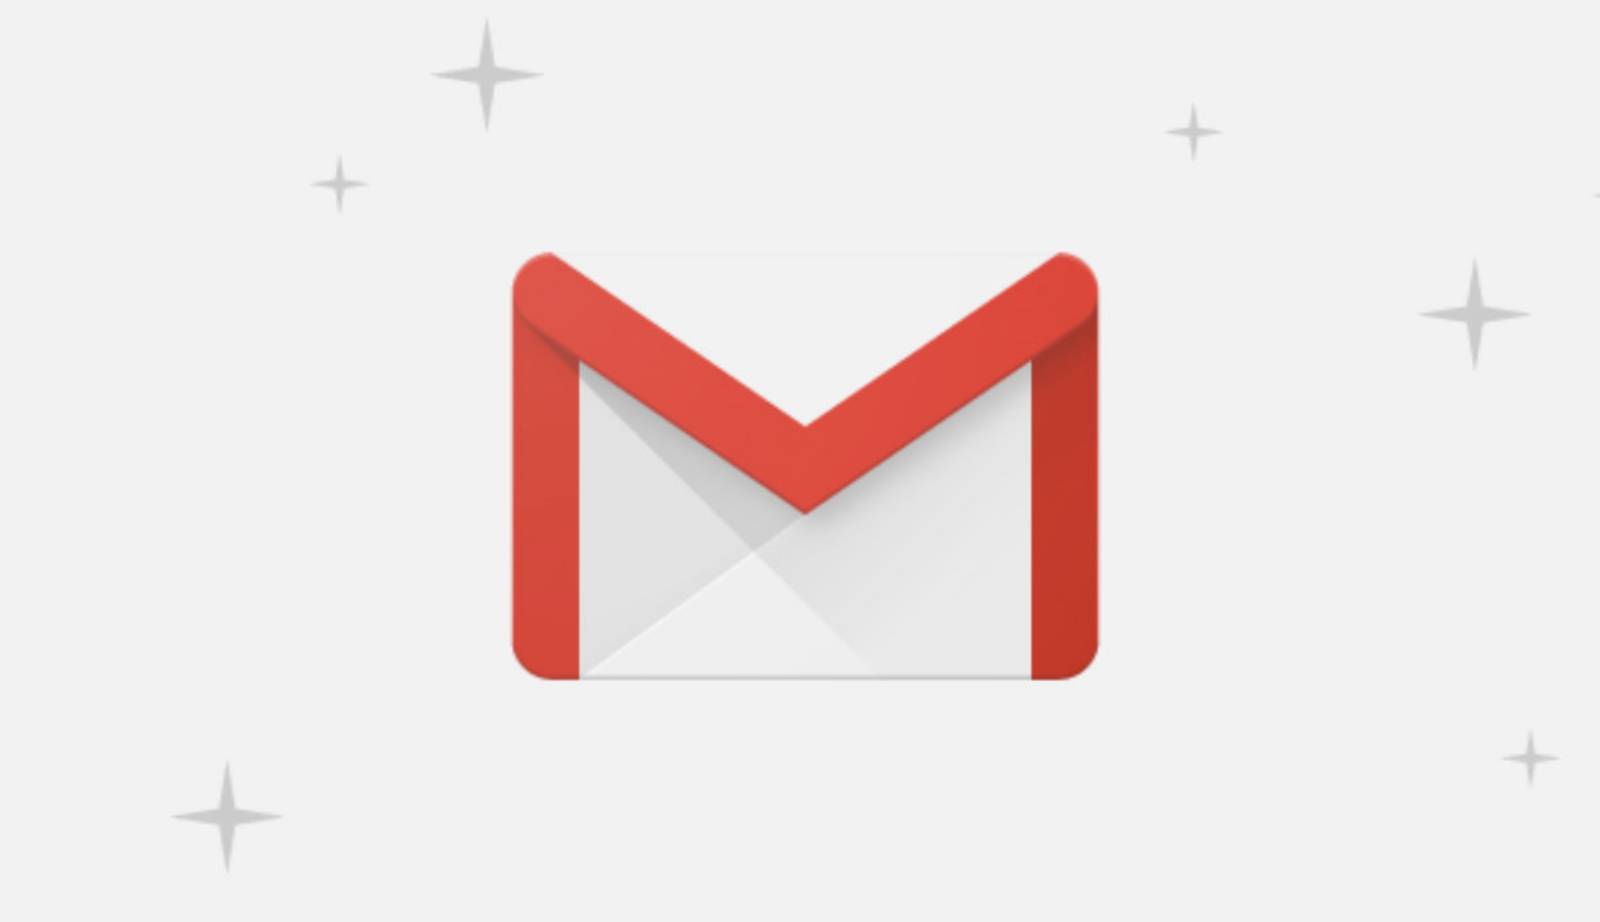 GMAIL Launches a New Useful Function in the Phone Application